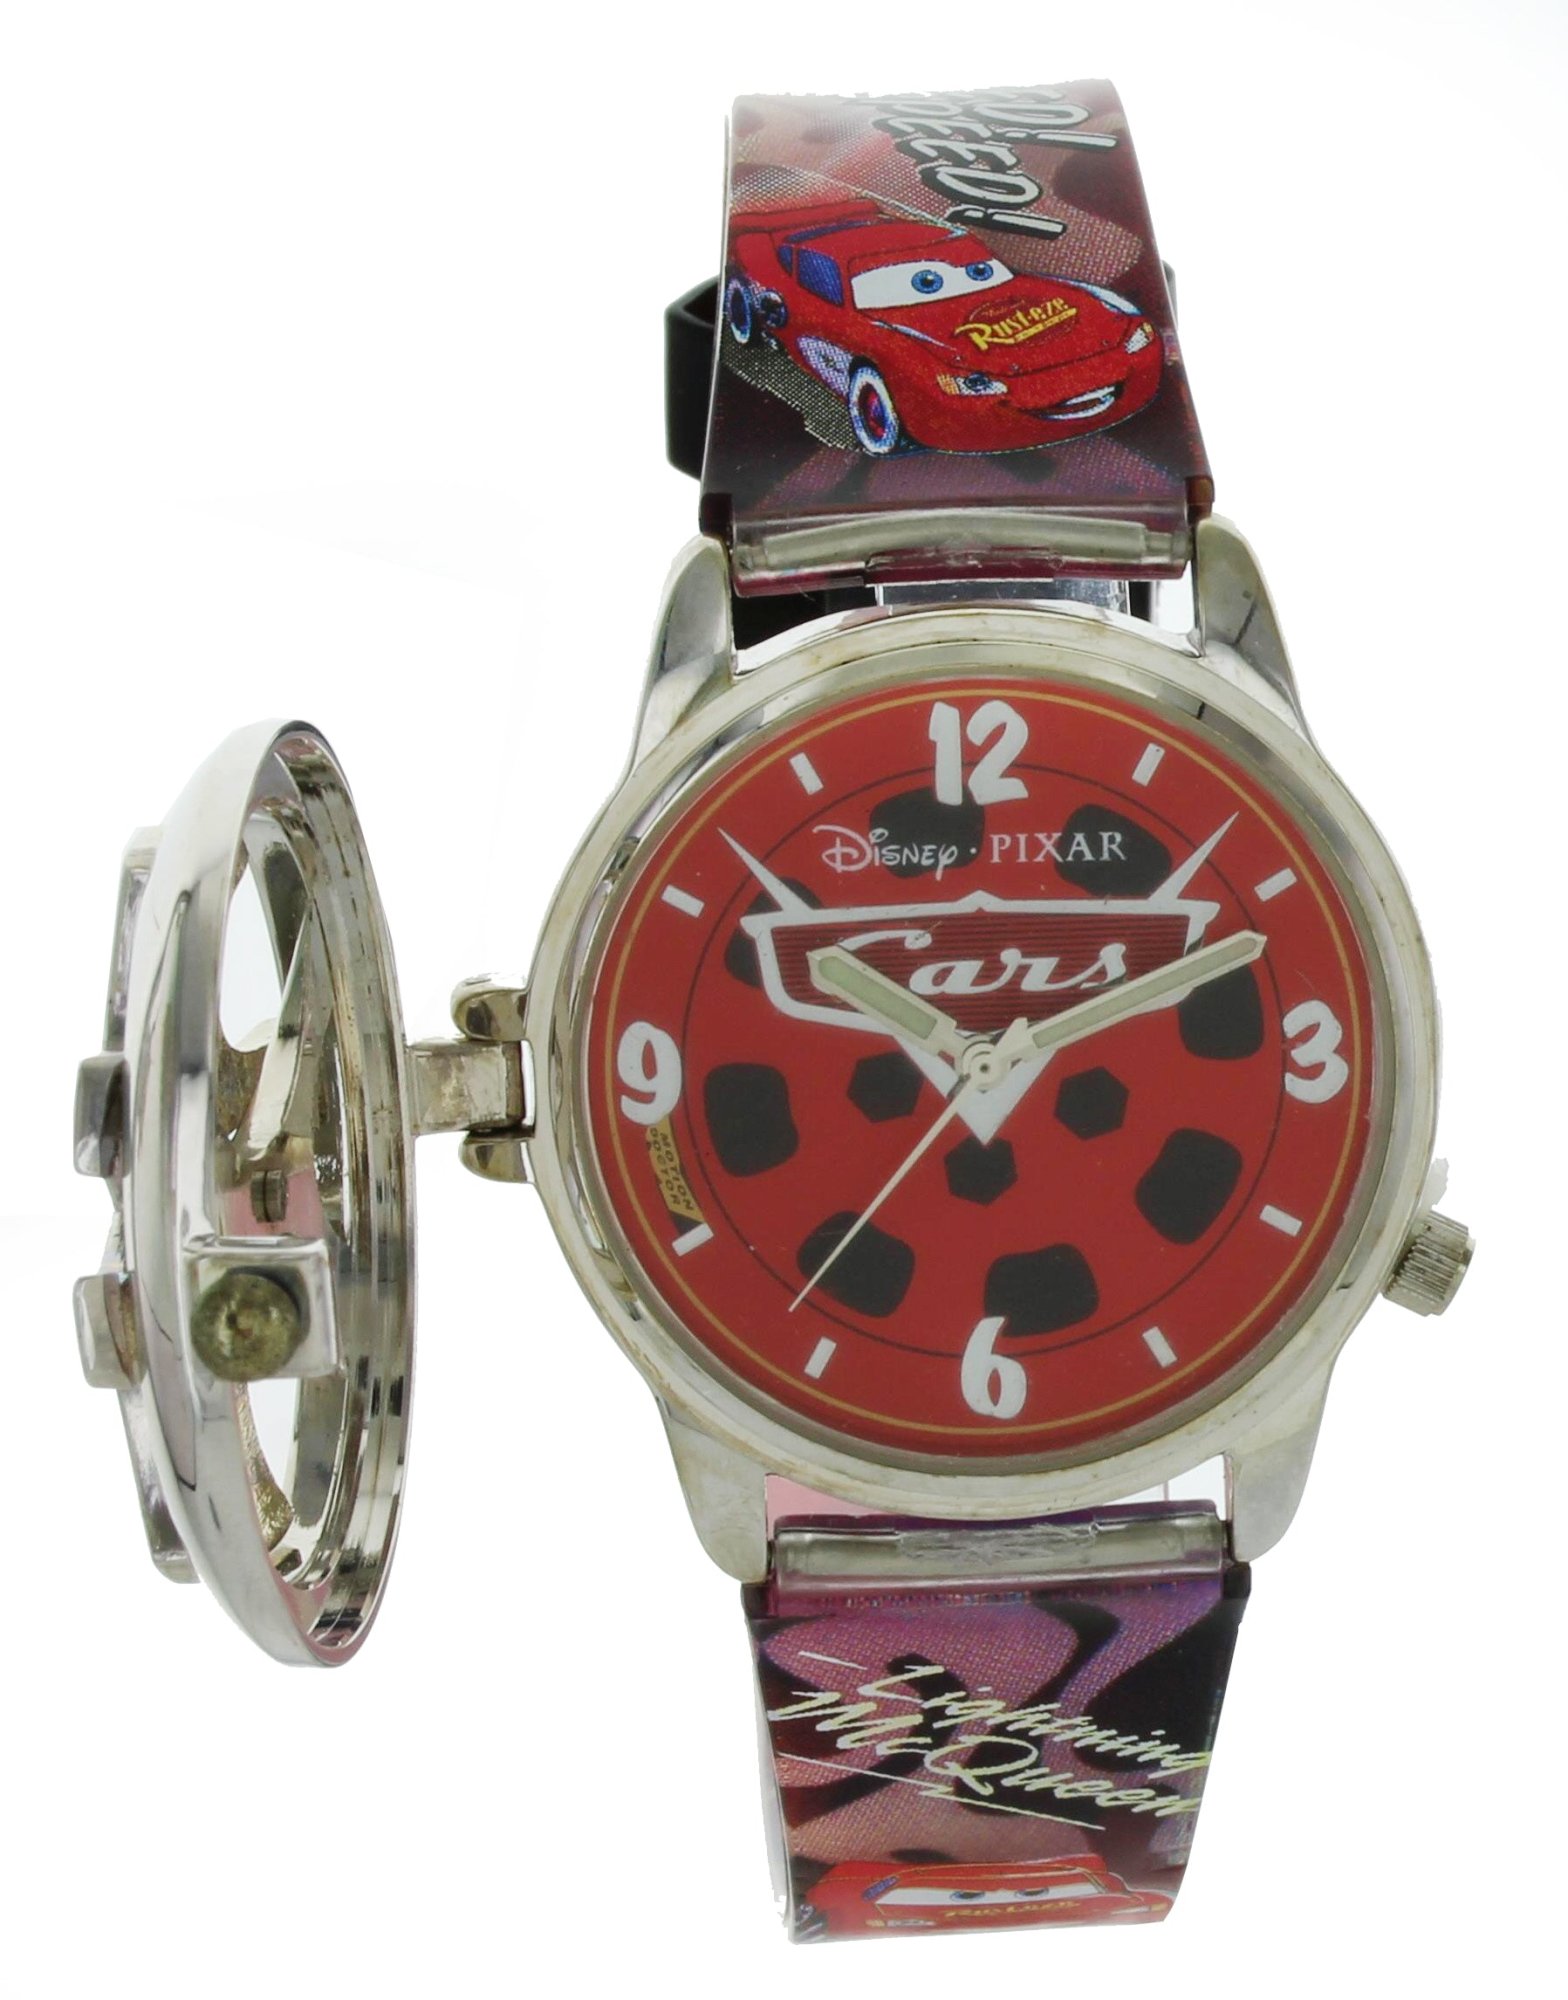 Model: Collectible Disney Pixar Cars Analog Watch With Spinner Cover